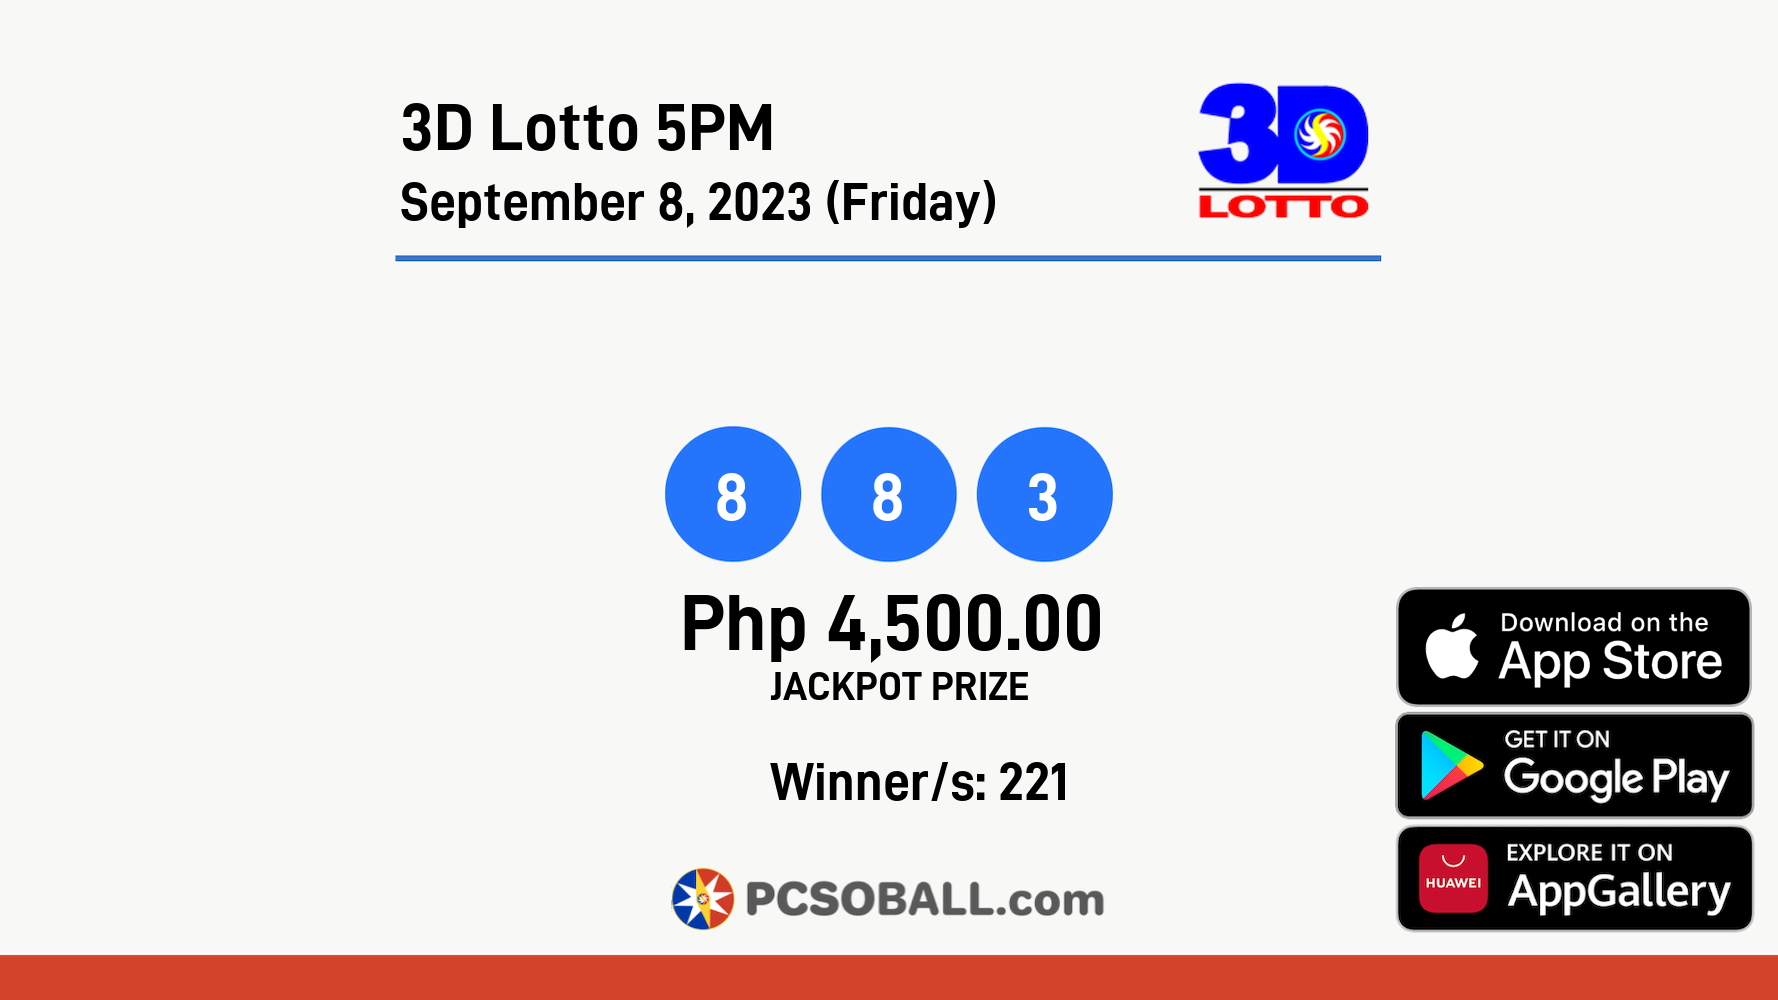 3D Lotto 5PM September 8, 2023 (Friday) Result